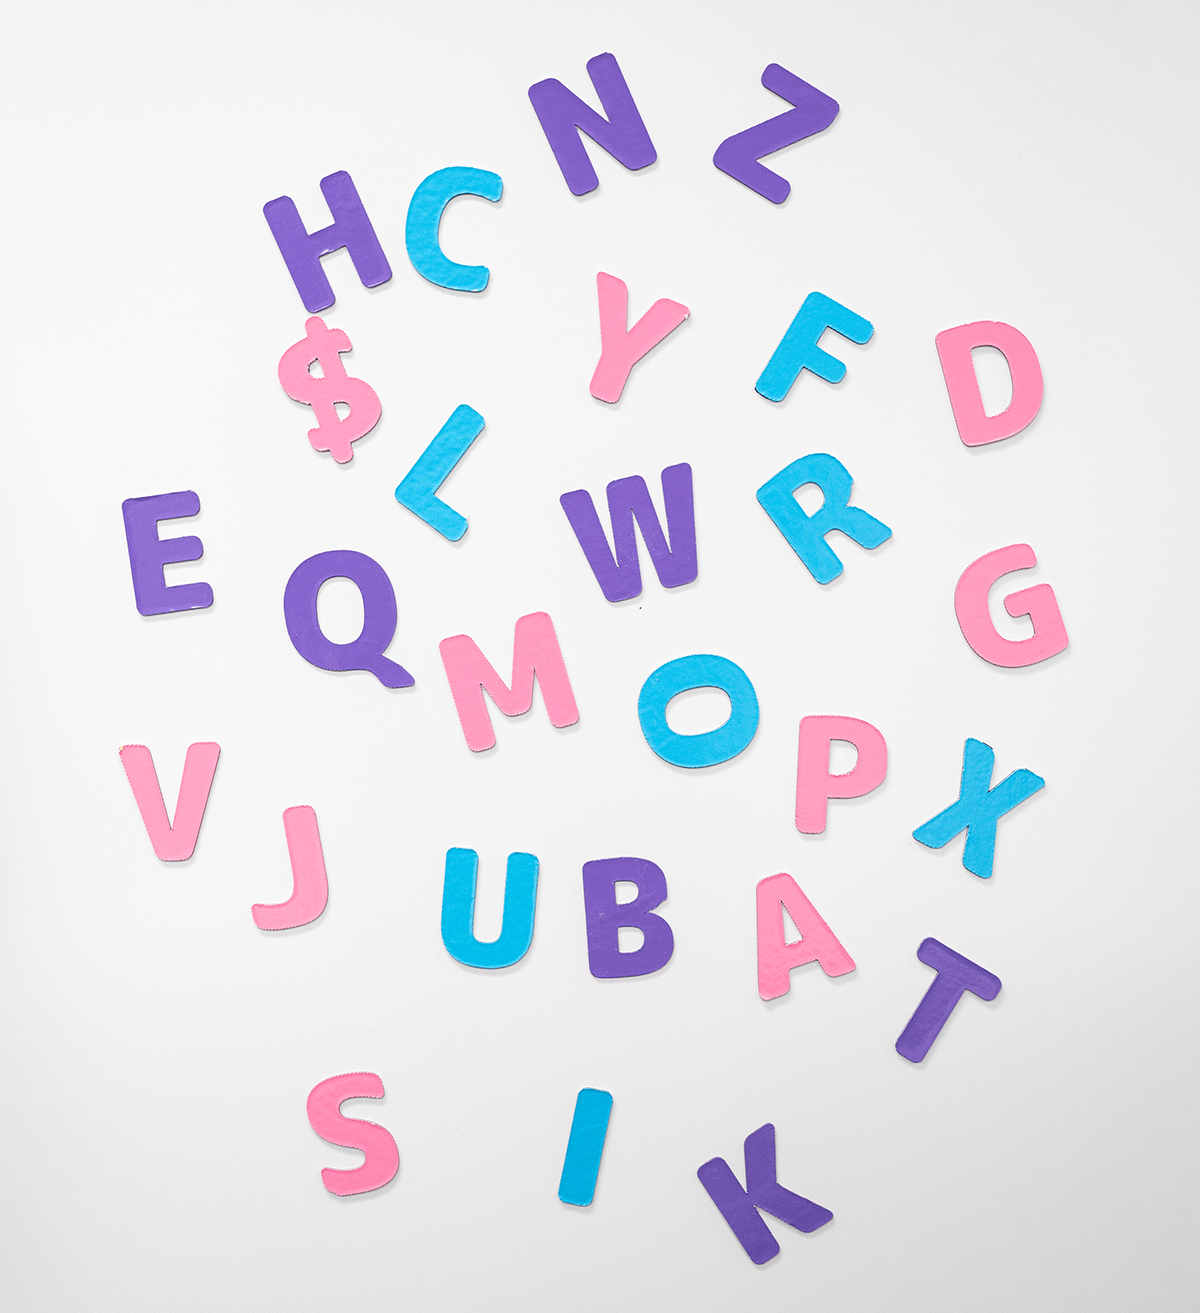 repeat to create set of alphabet magnets